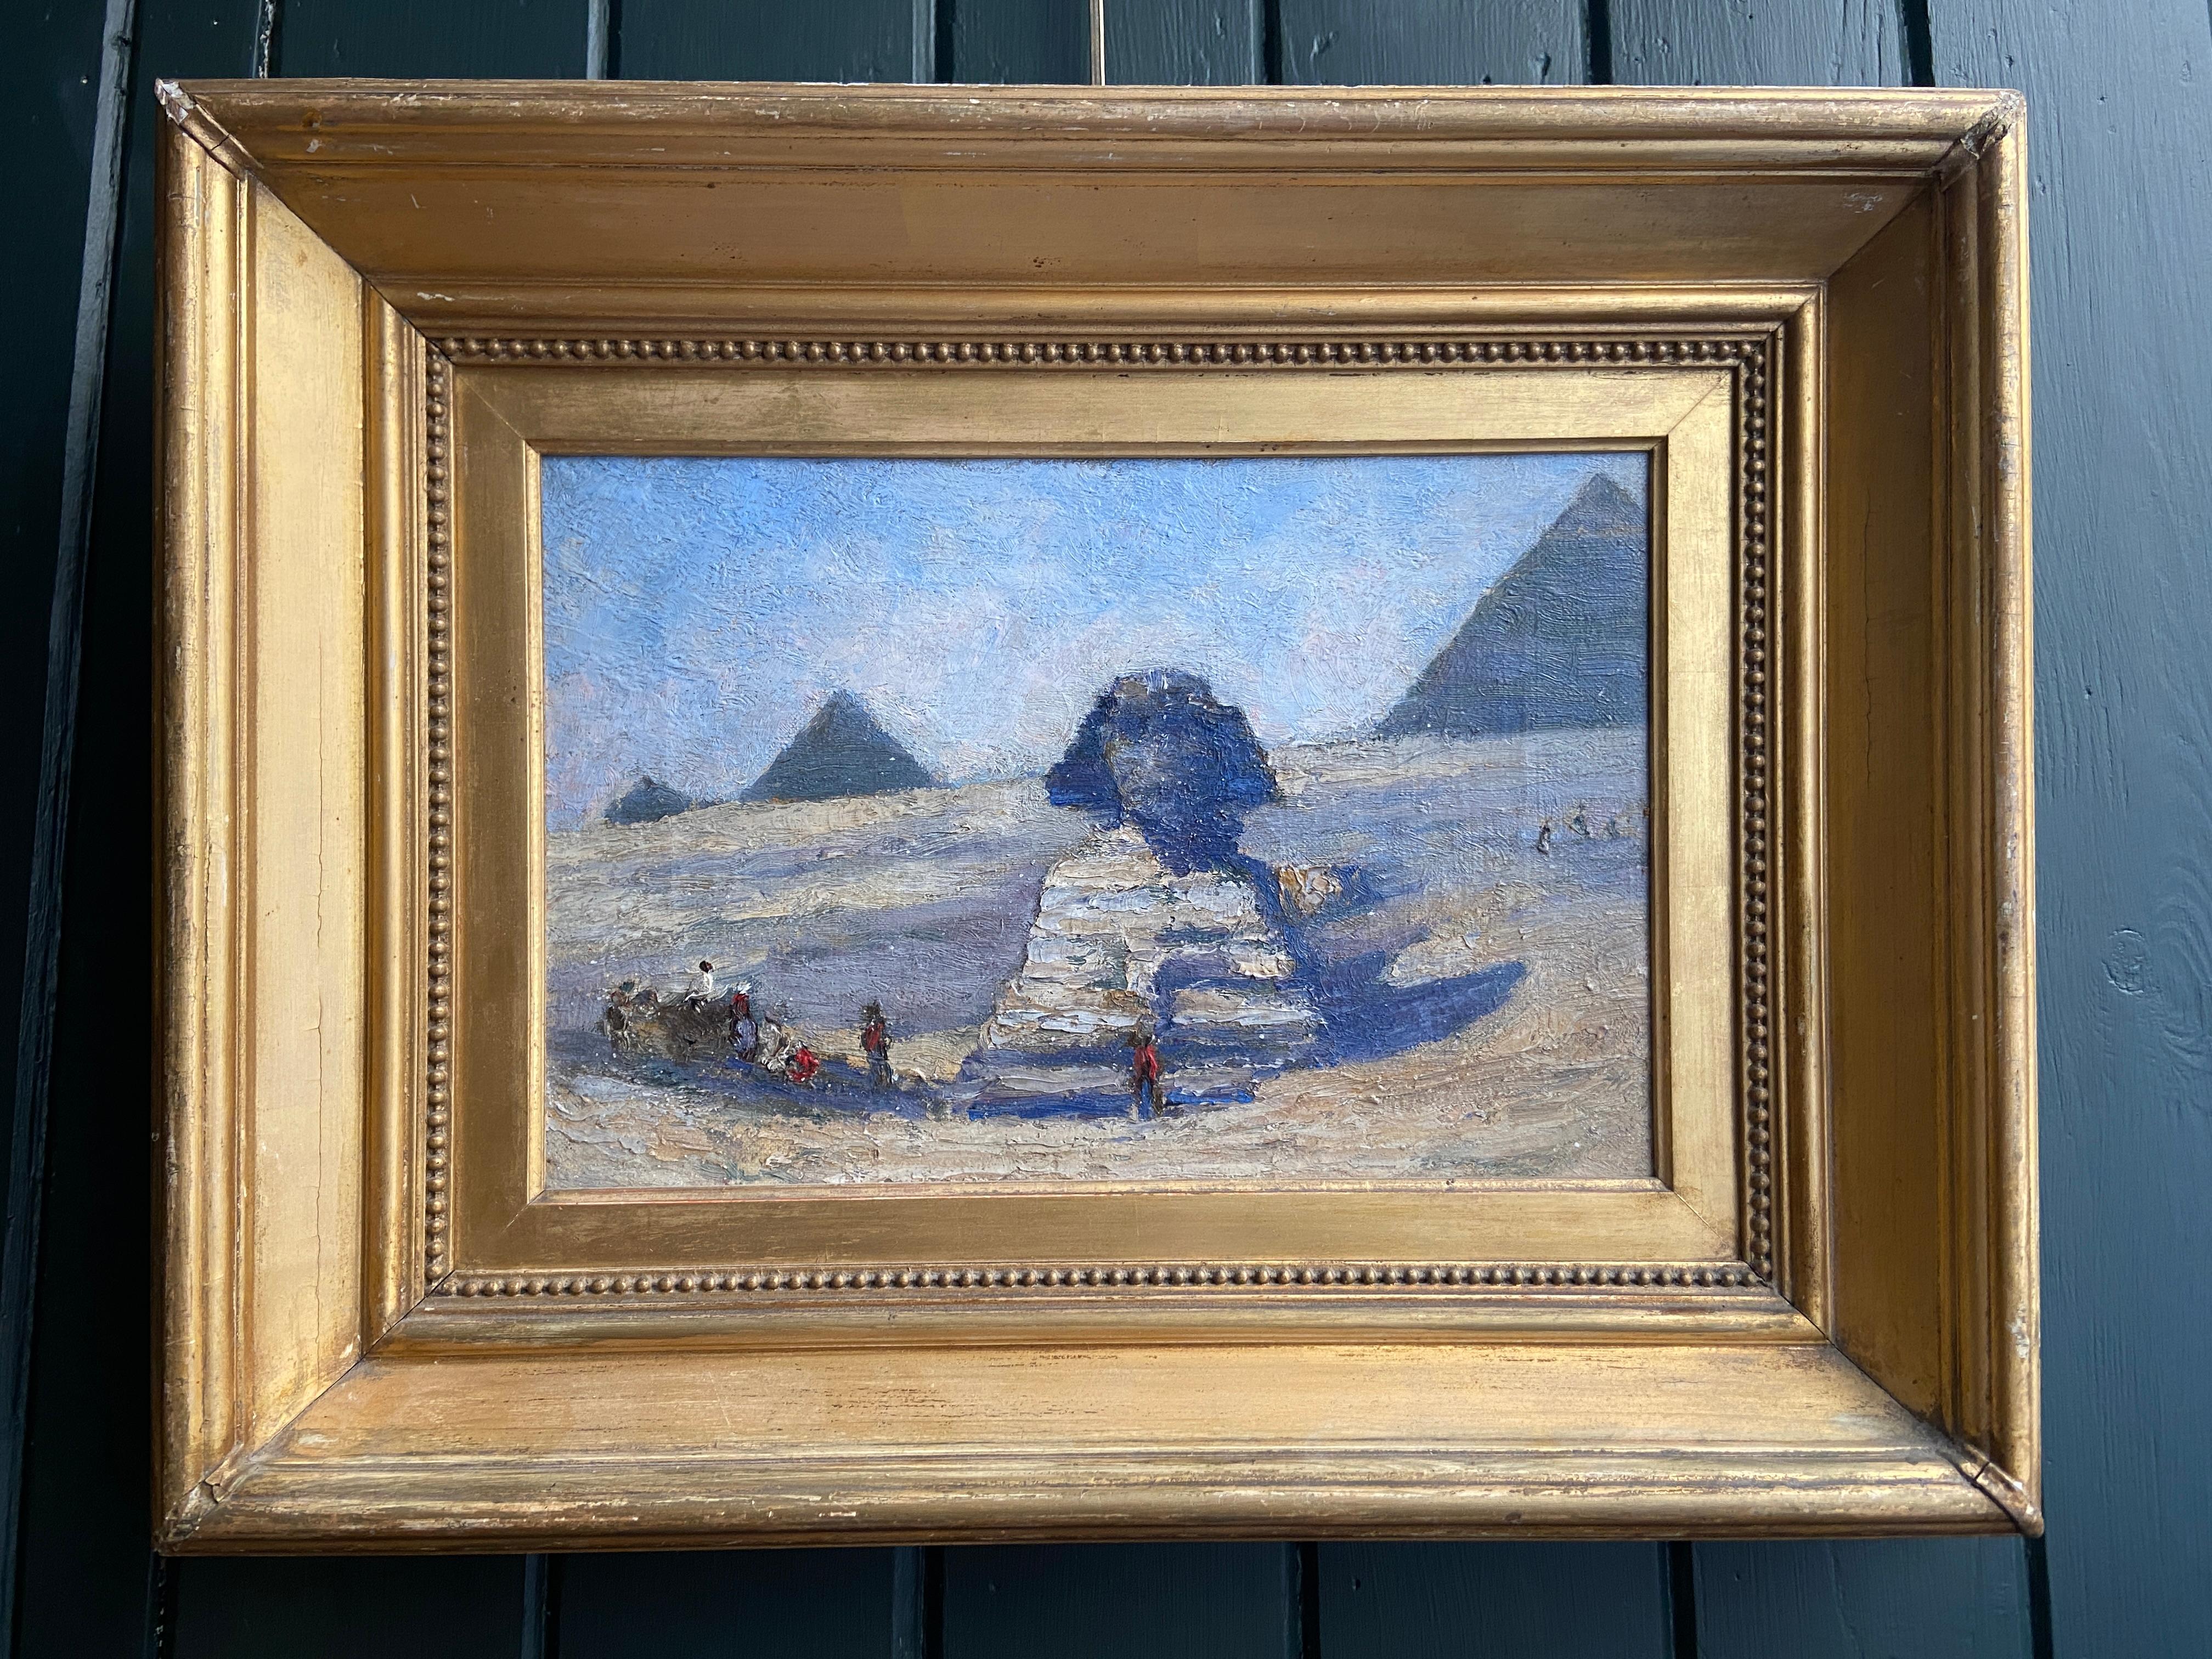 A View of the Great Sphinx and the Pyramids of Giza, 19th Century British School - Painting by 19th century British School